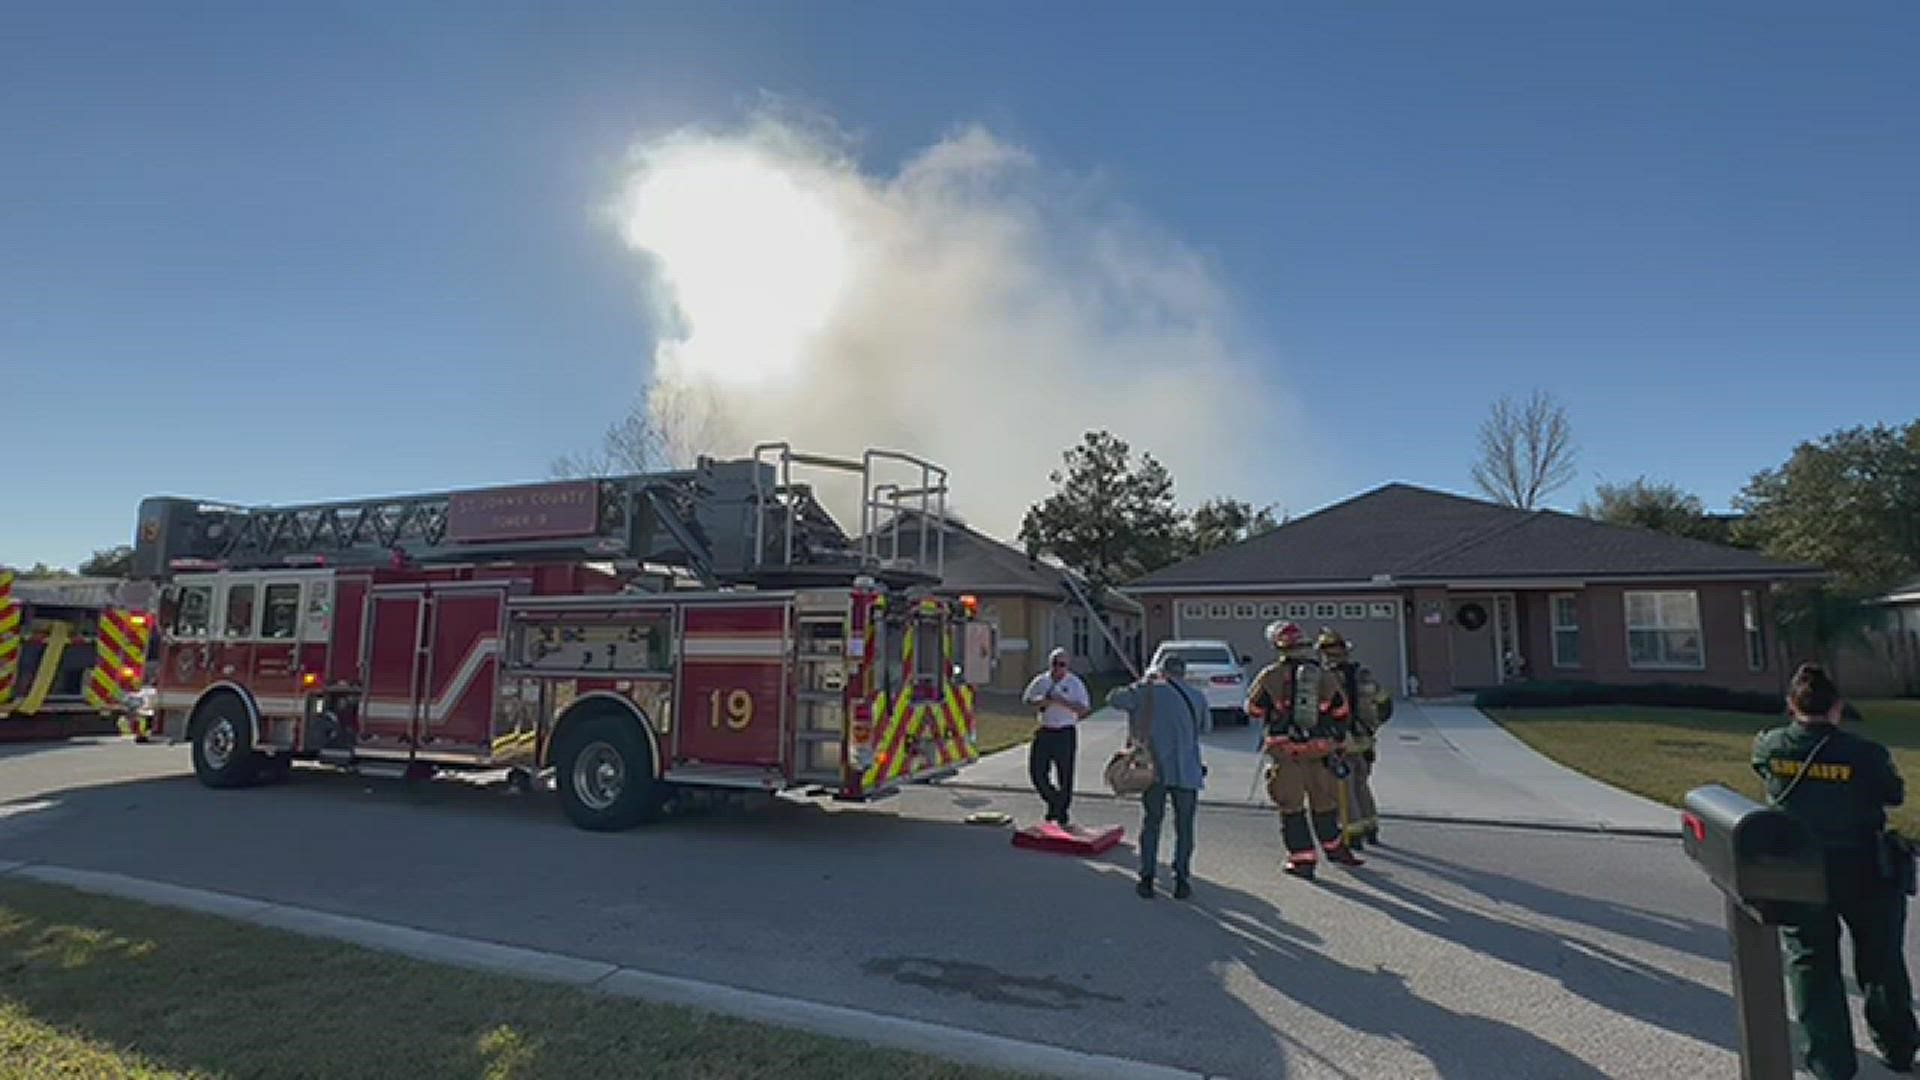 Crews responded to a home on fire in the 200 block of Prince Phillip Drive around 10 a.m. Wednesday.